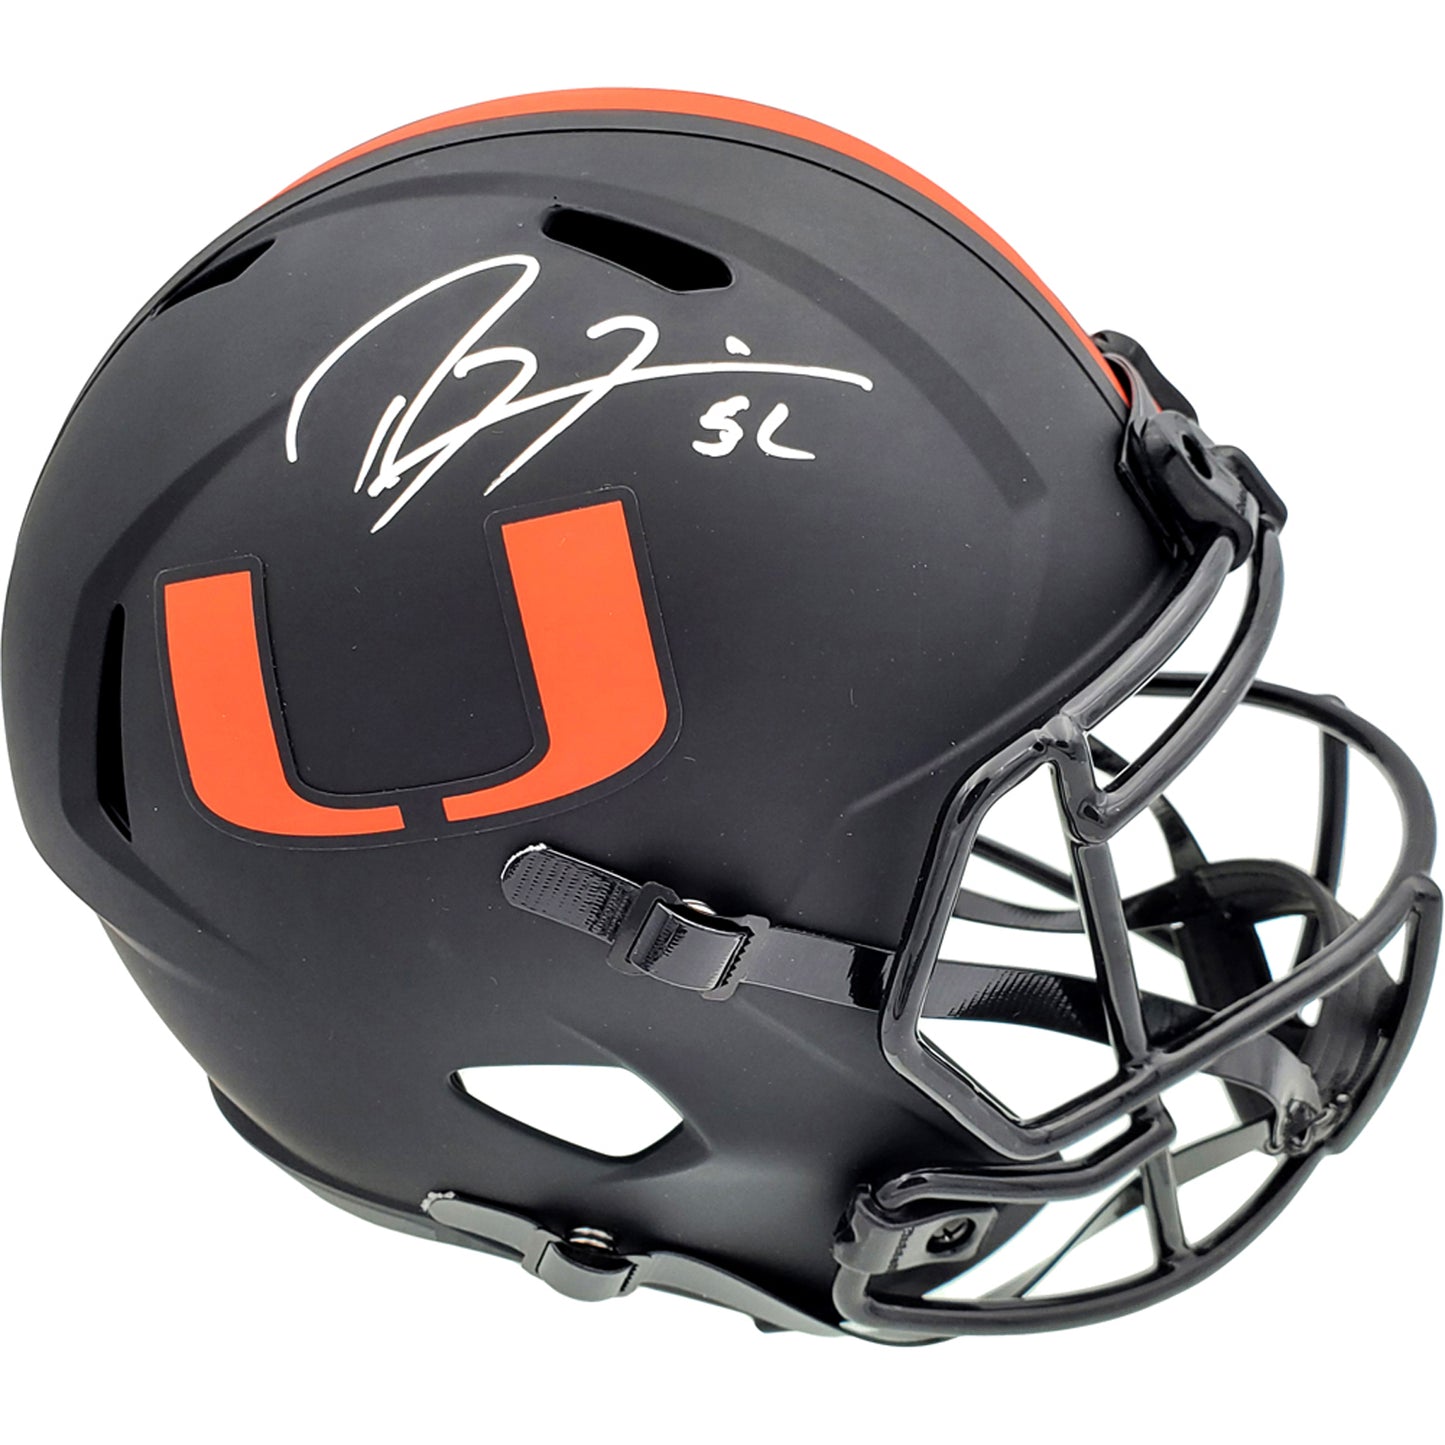 Ray Lewis Autographed Miami Hurricanes (ECLIPSE Alternate) Deluxe Full-Size Replica Helmet - Beckett